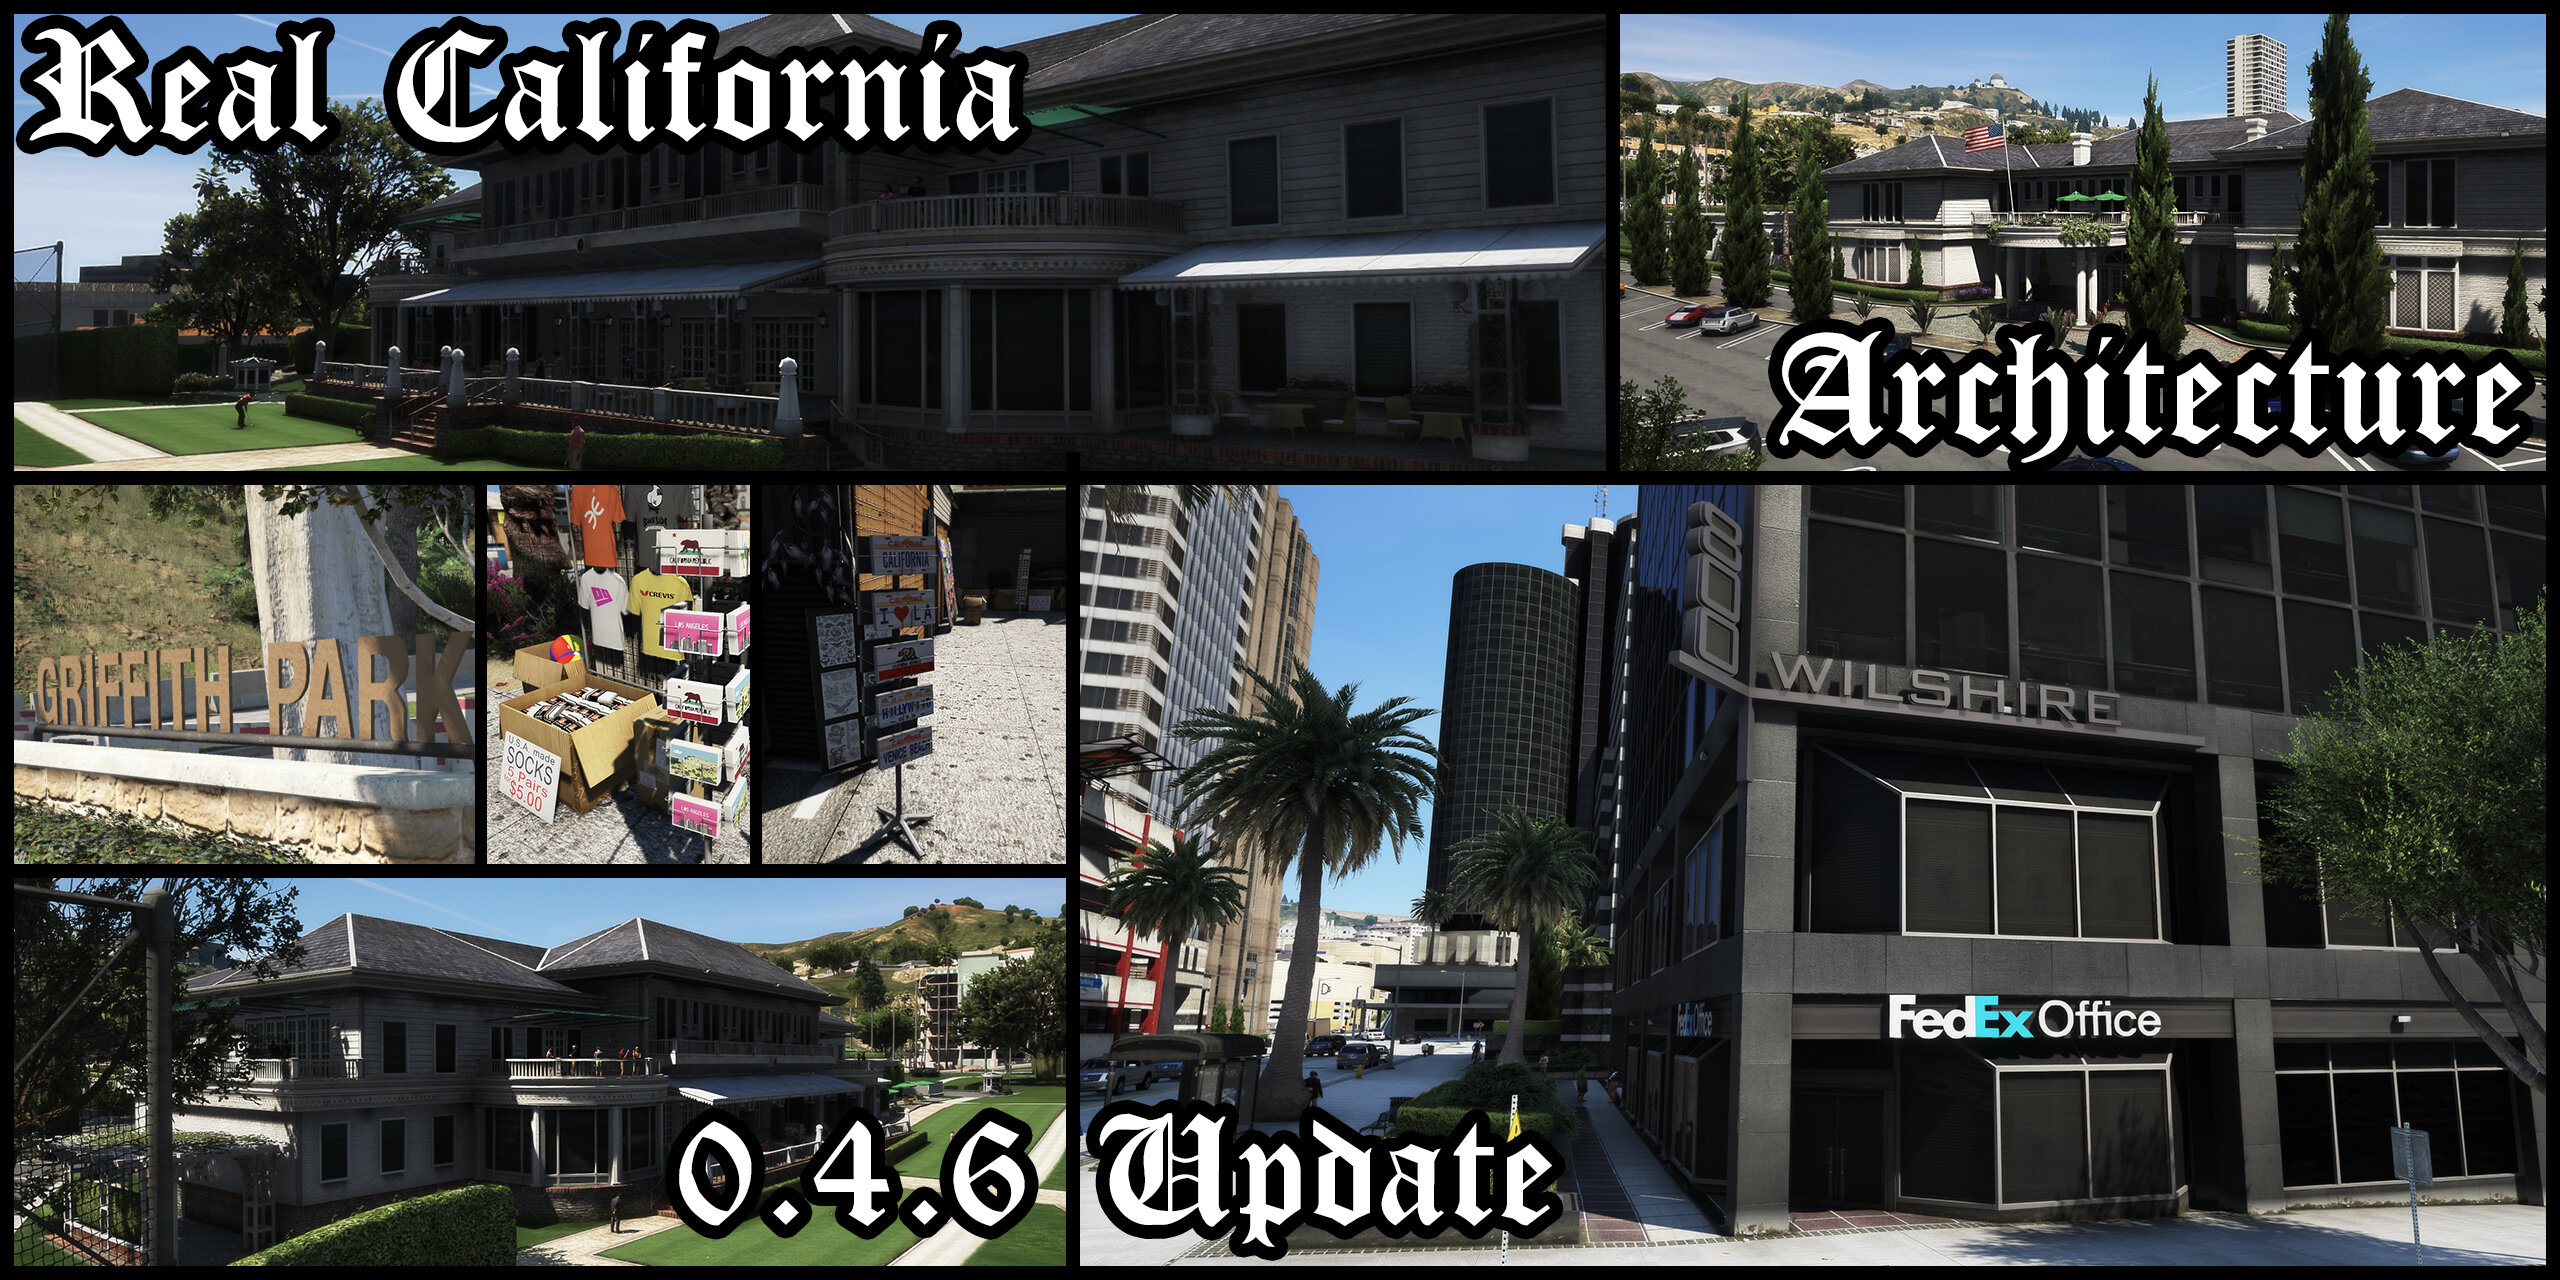 REAL LOS ANGELES STORY MODE - GTA 5 MODS